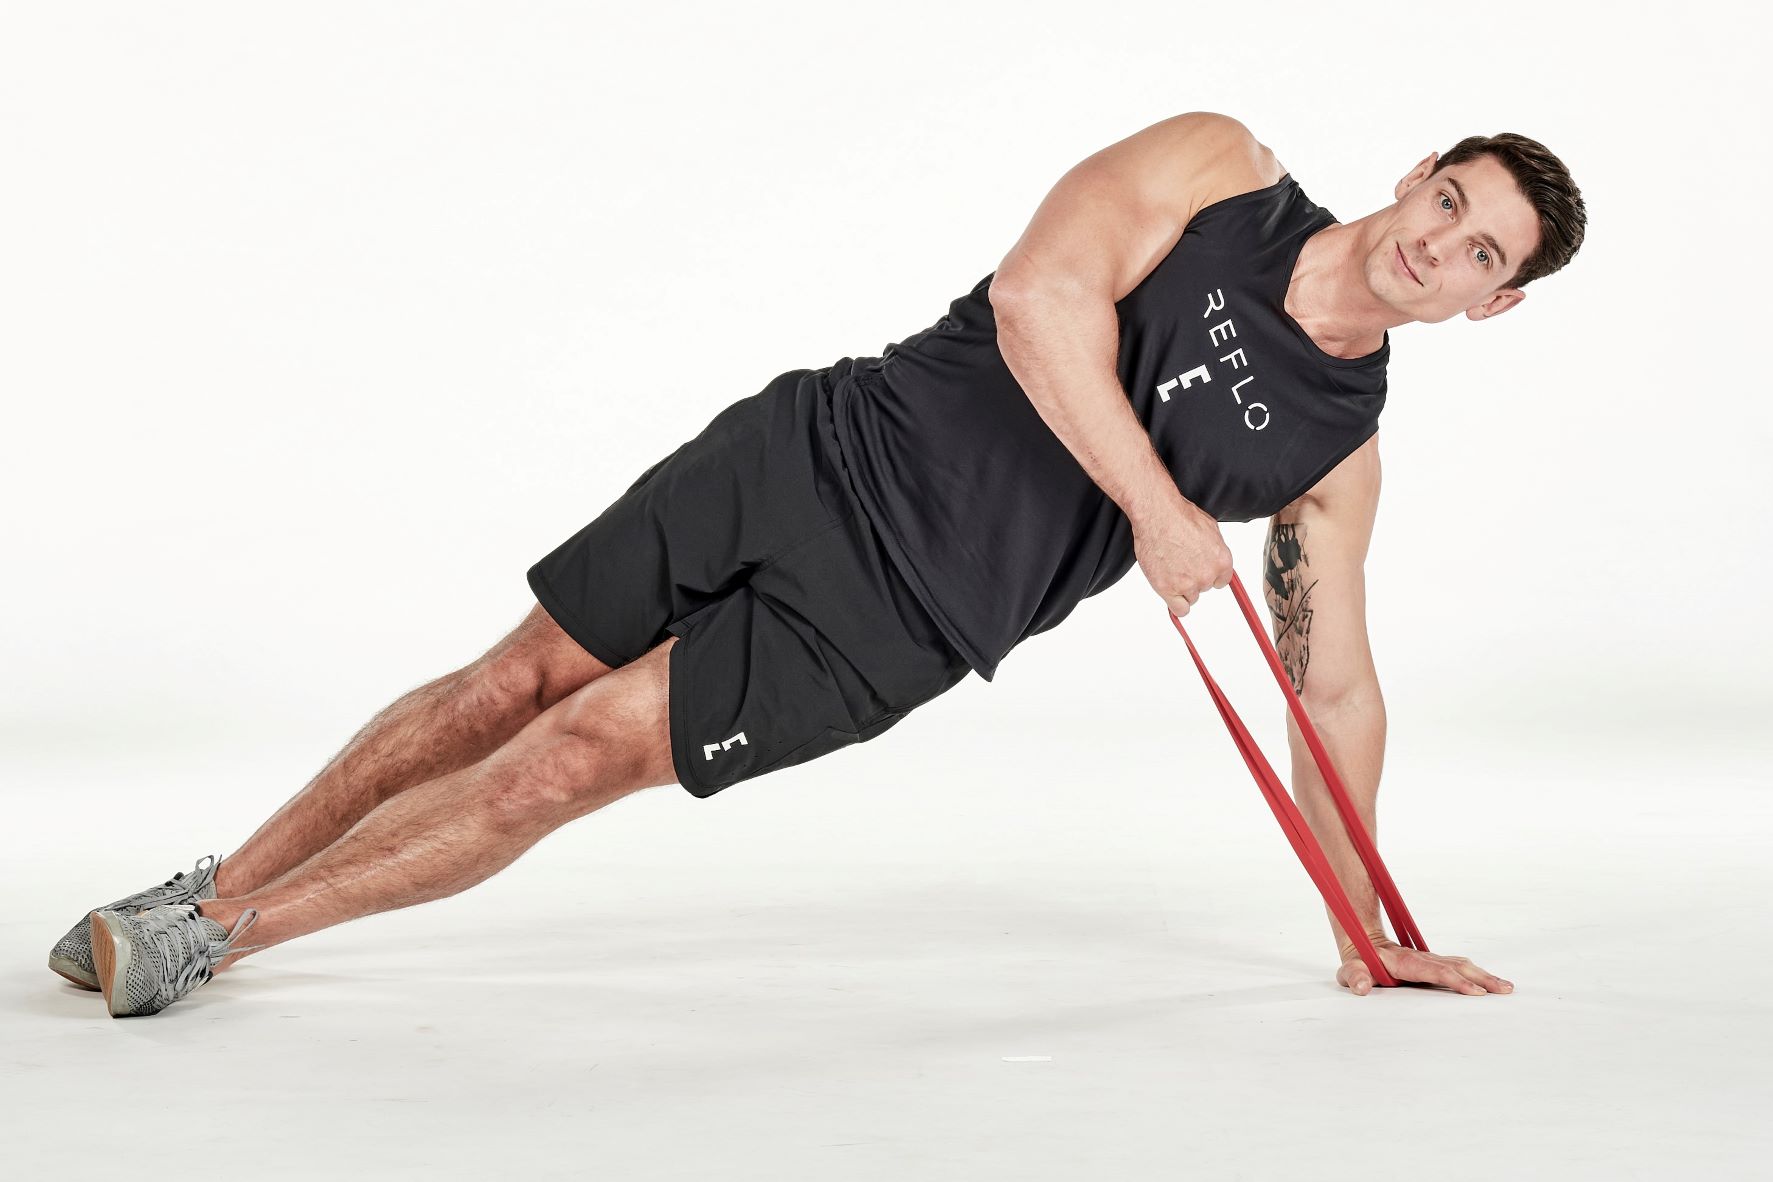 man demonstrating step one of side plank high pull; in a side plank position, his top hand holds a resistance band that is secured under his bottom hand on the floor; he wears a black fitness vest, black shorts and trainers